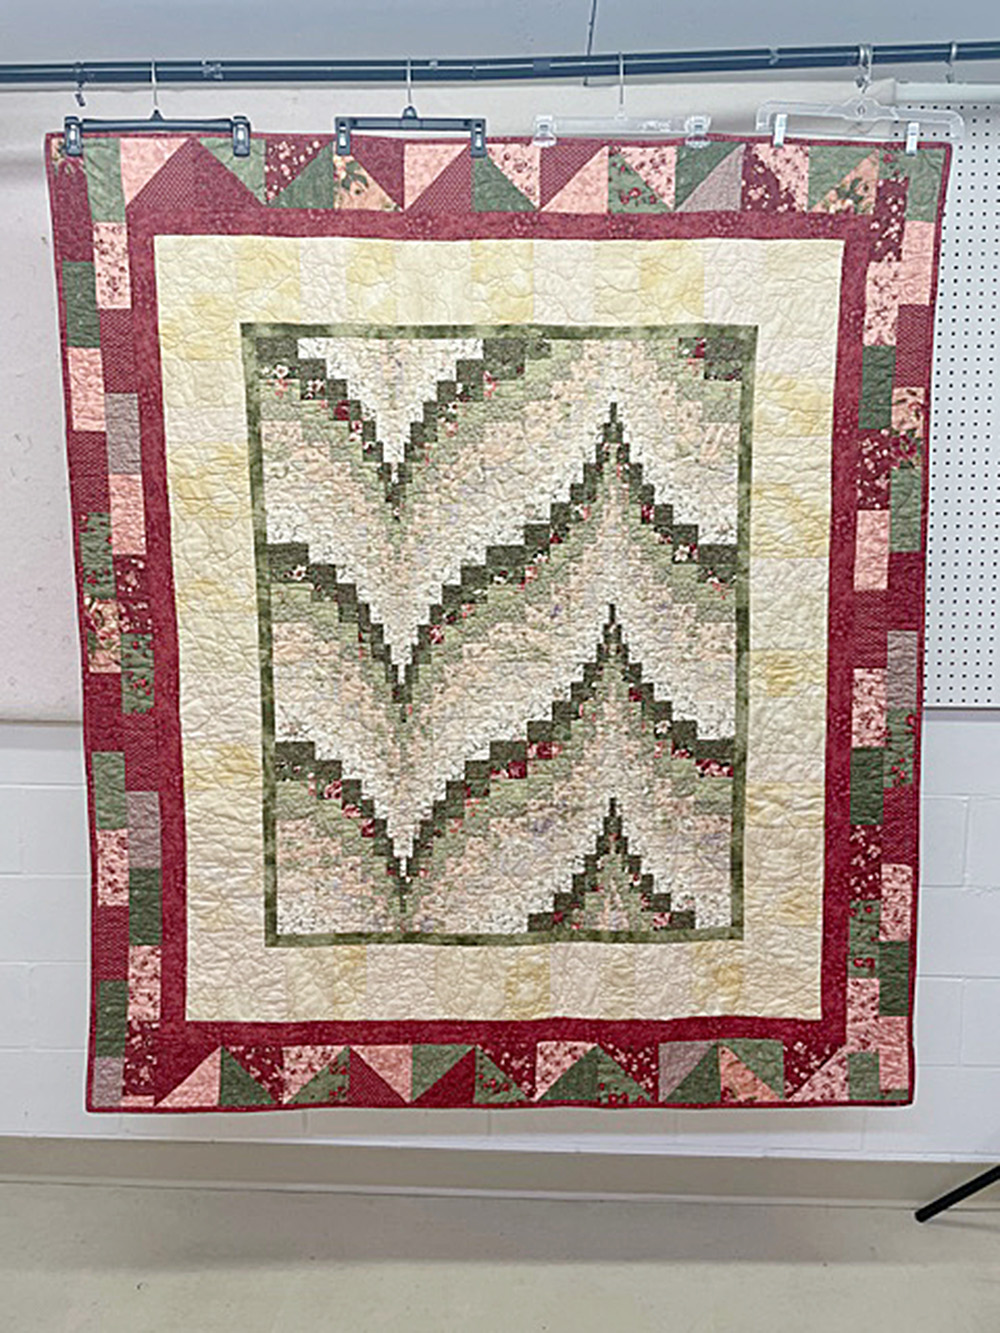 Patchwork Pals to display ‘All Things Fiber’ at CCAC in October